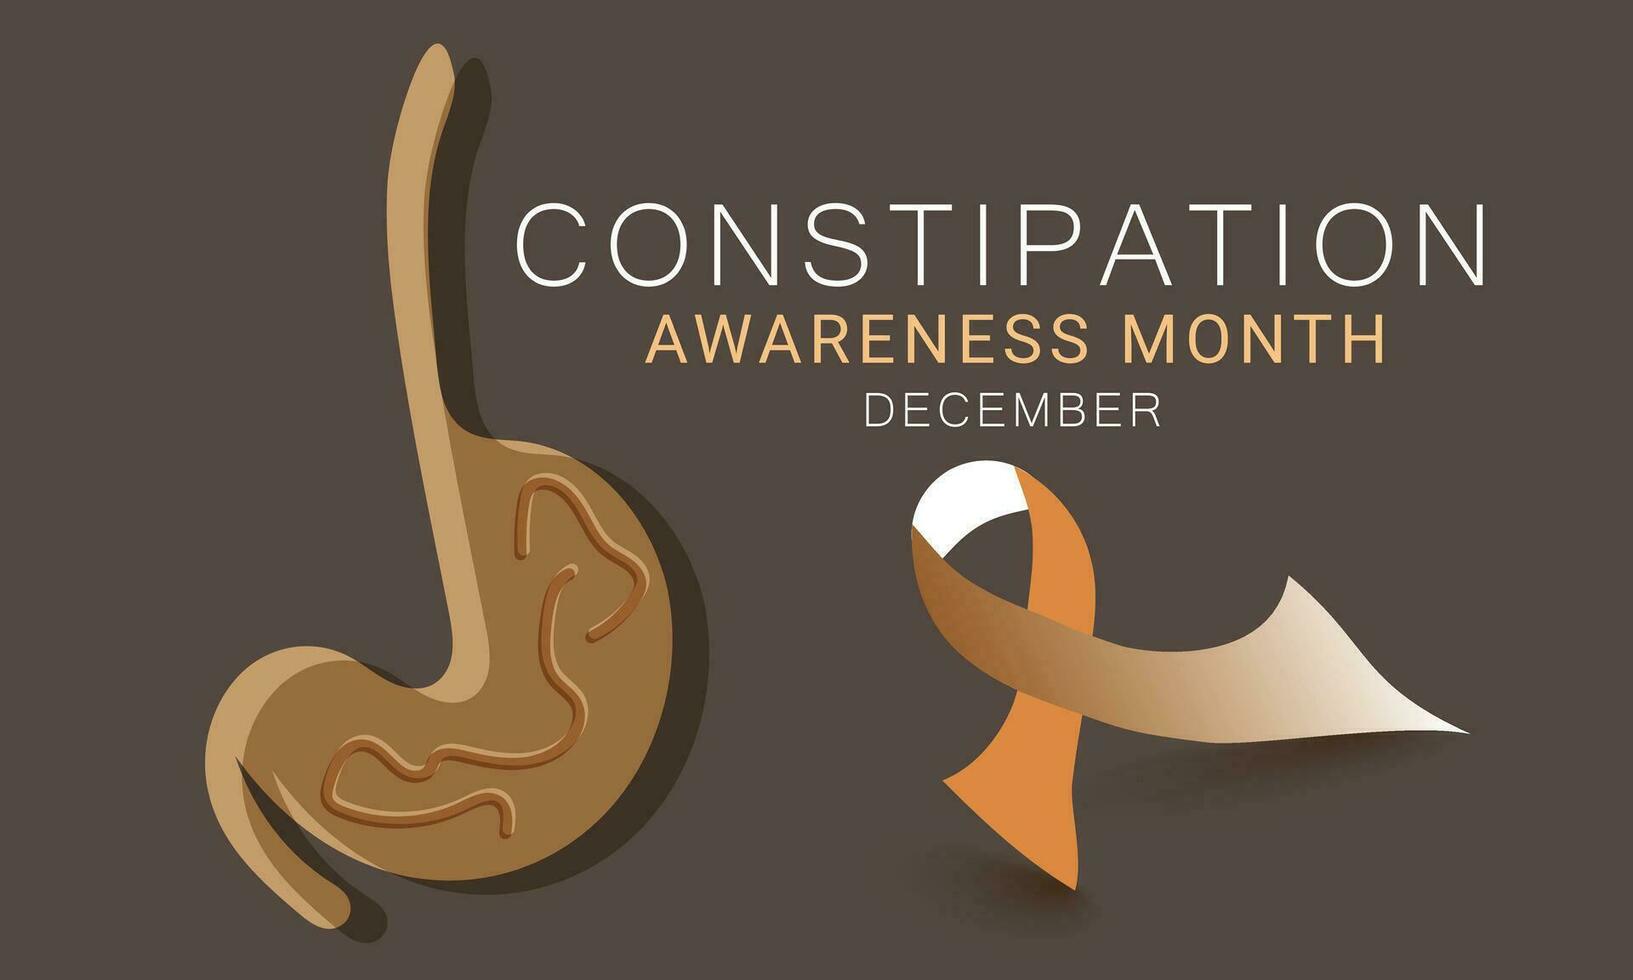 Break the silence on Constipation